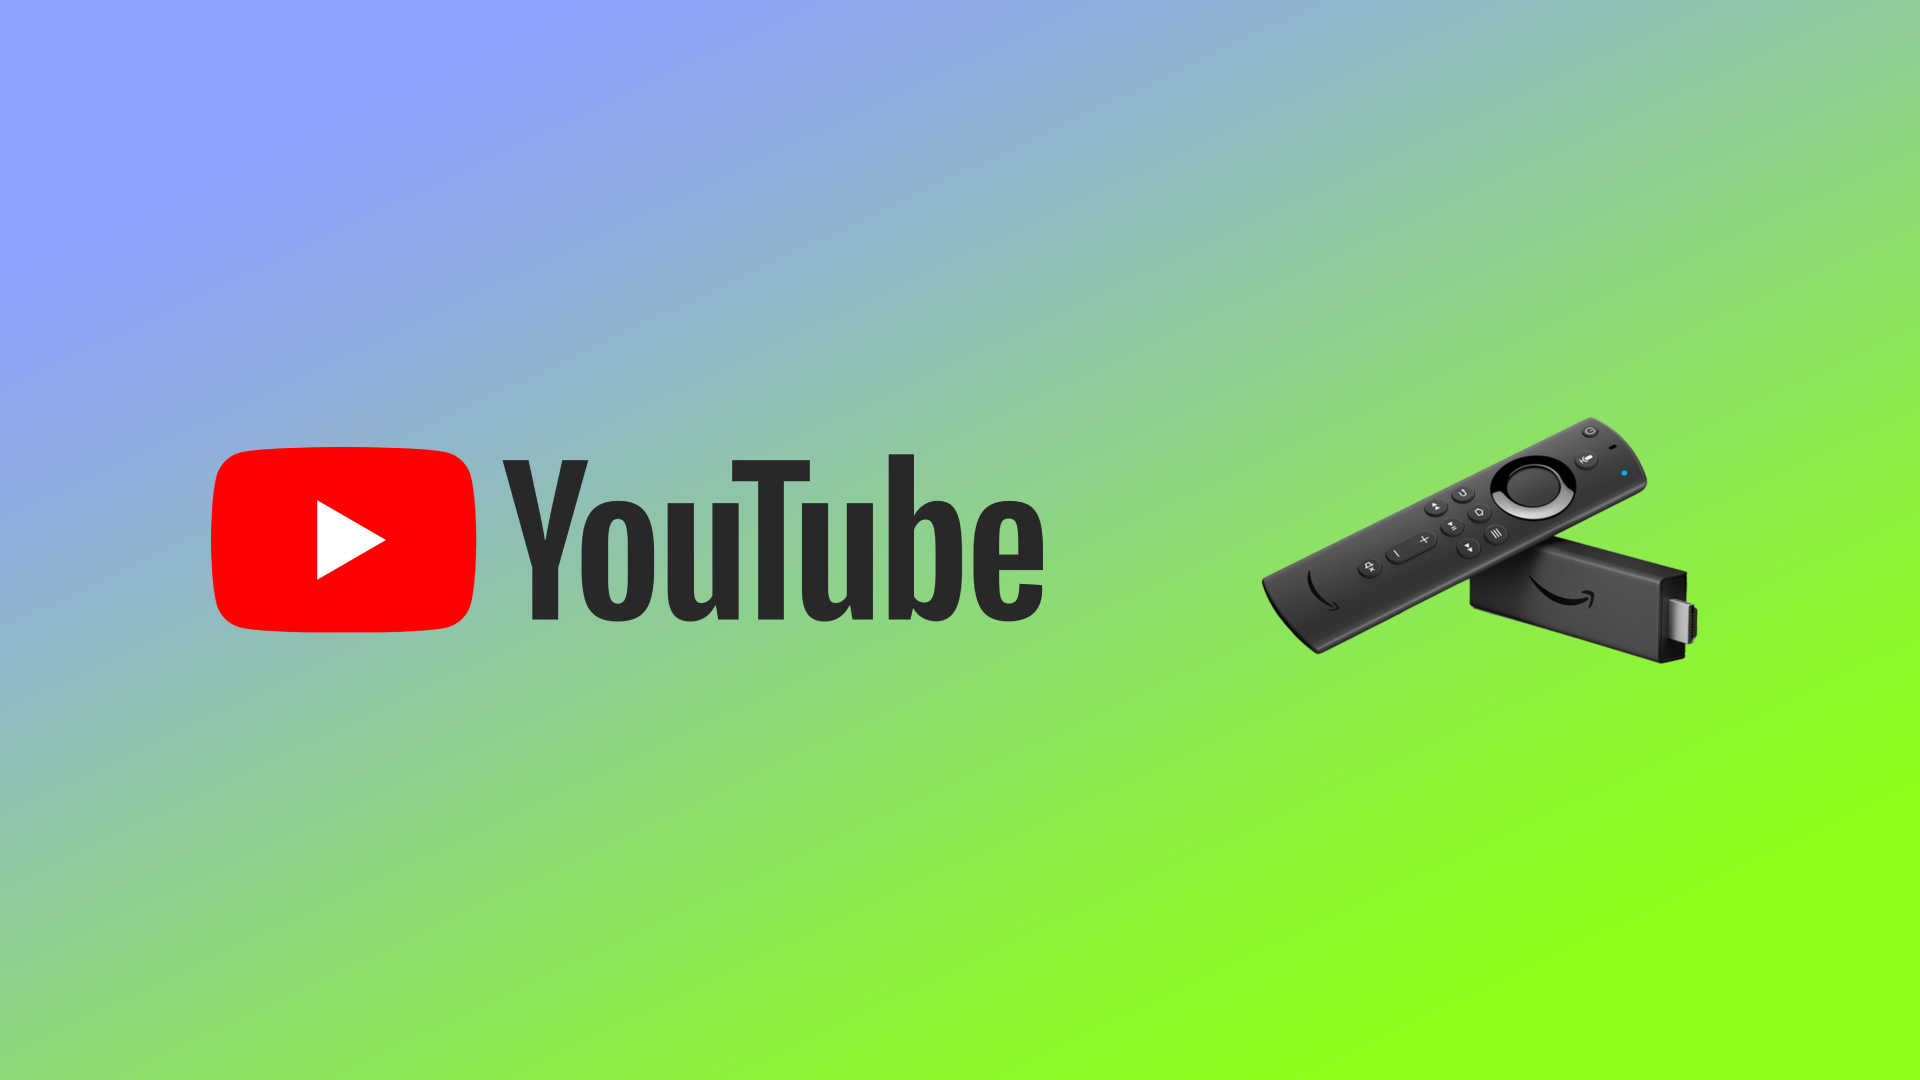 How to block YouTube on FireStick